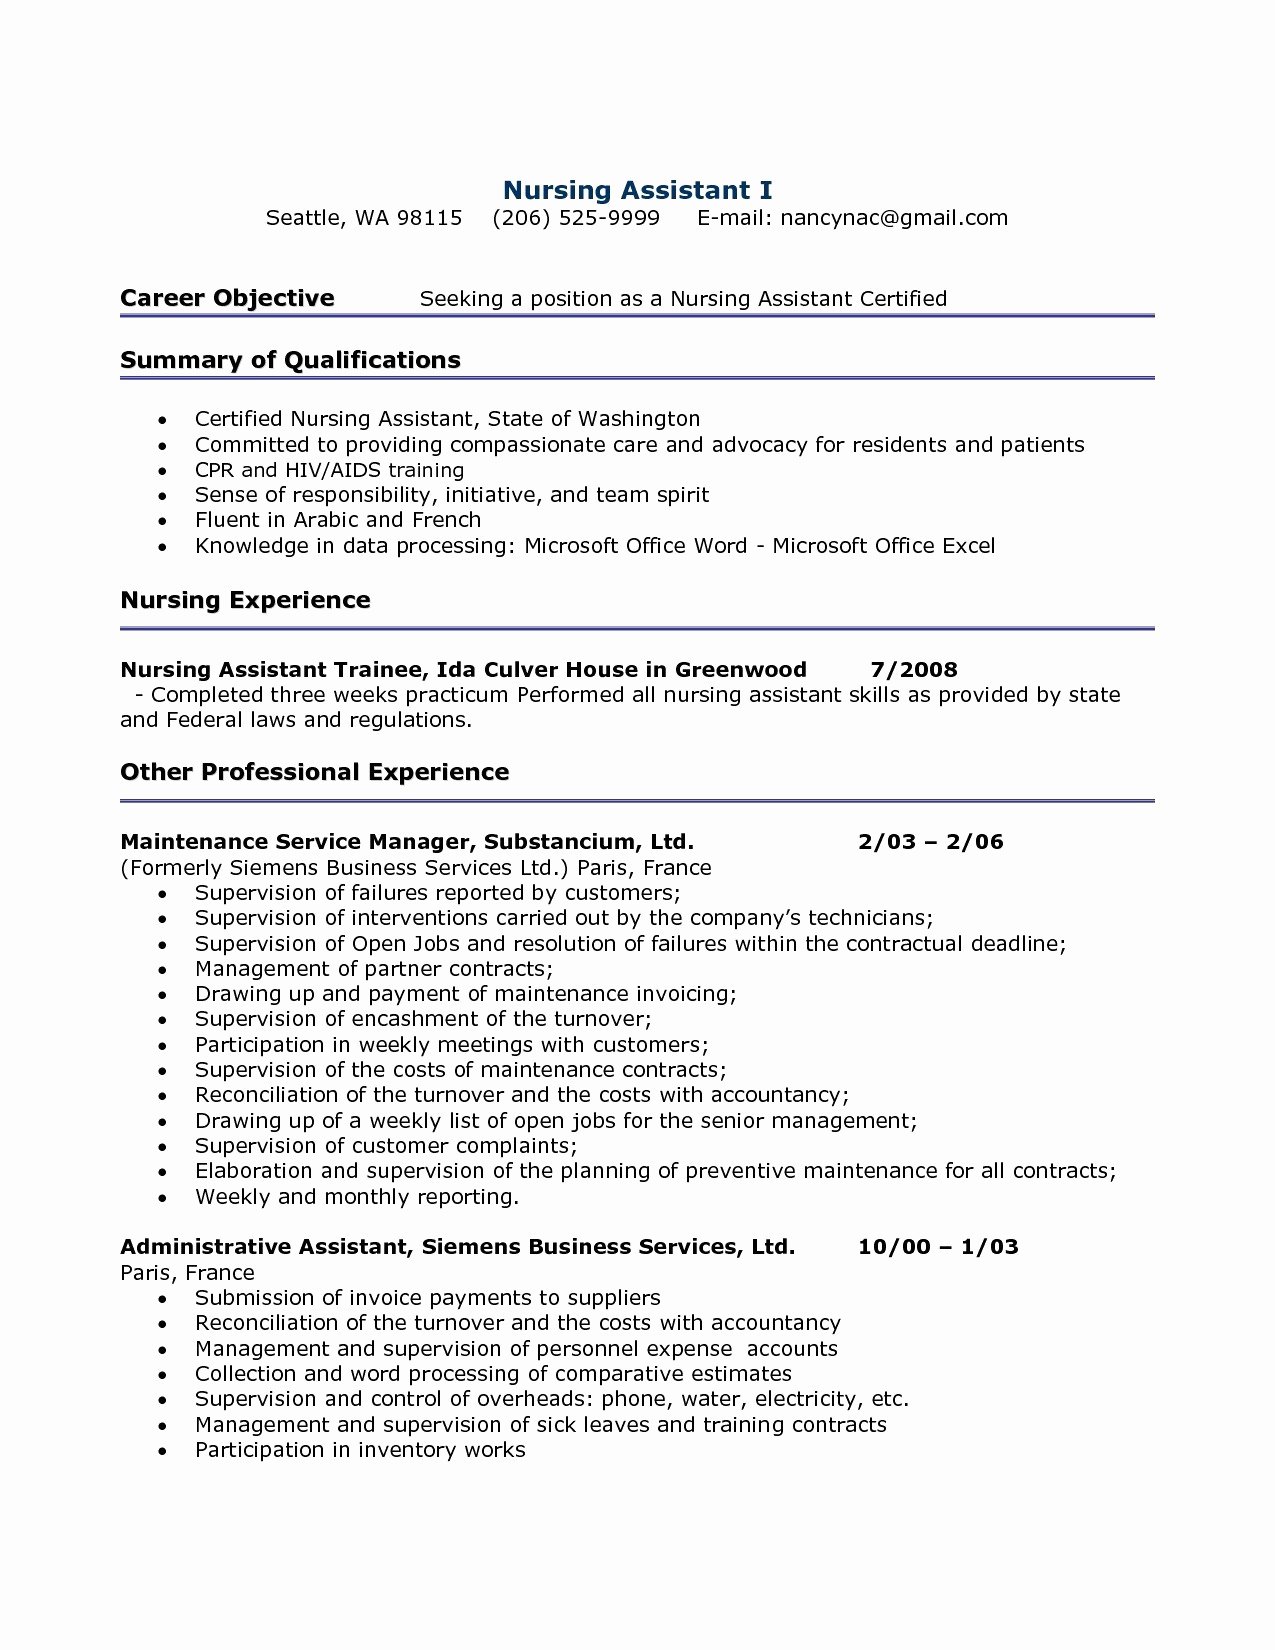 Professional Resume Writing Service Reviews Best Resume